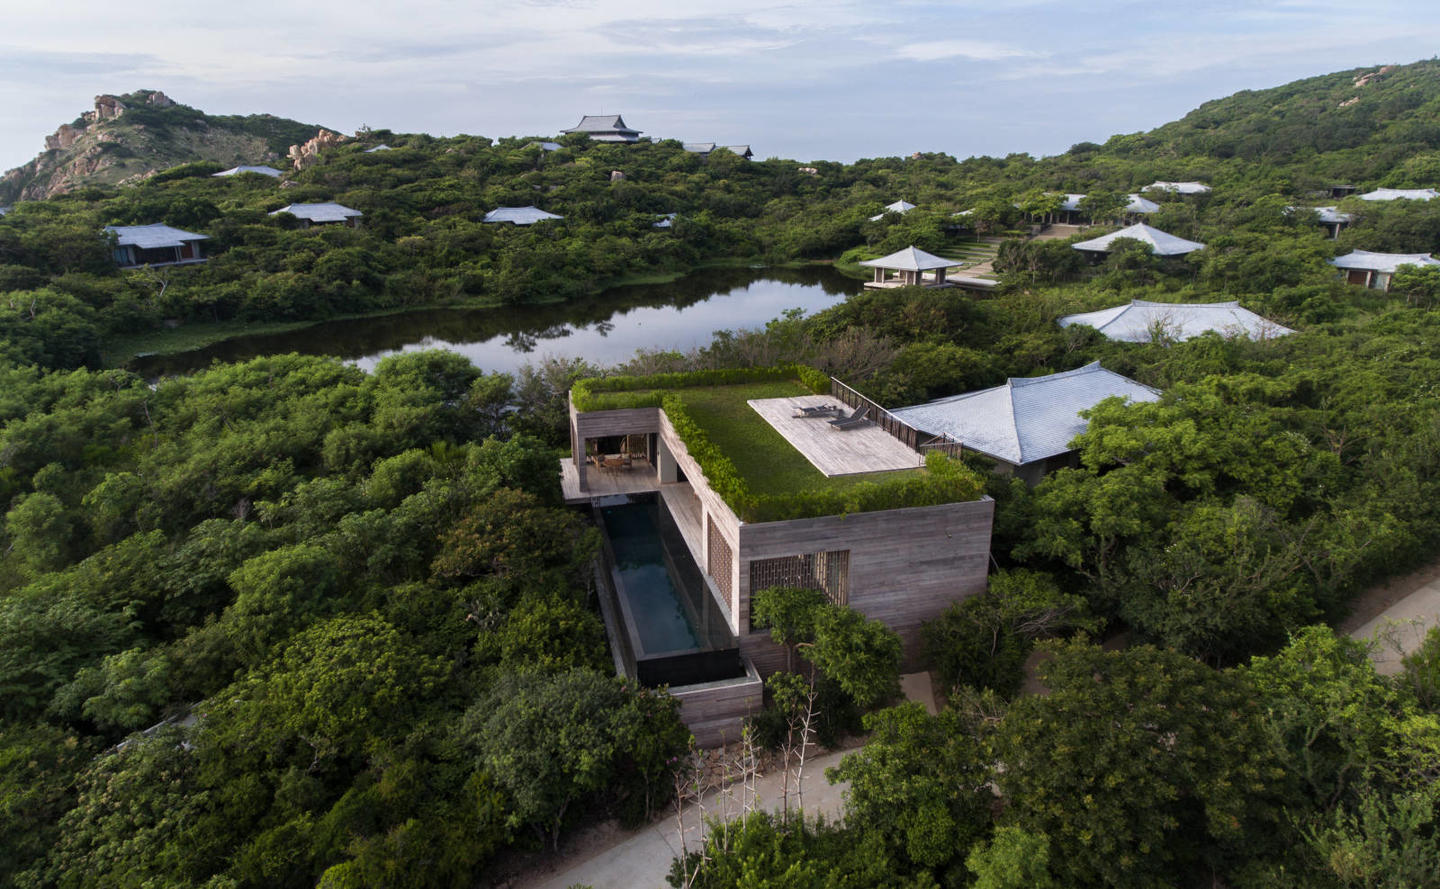 Amanoi, Vietnam - Acommodation, Aerial View of the Forest Wellness Pool Villa and lotus lake